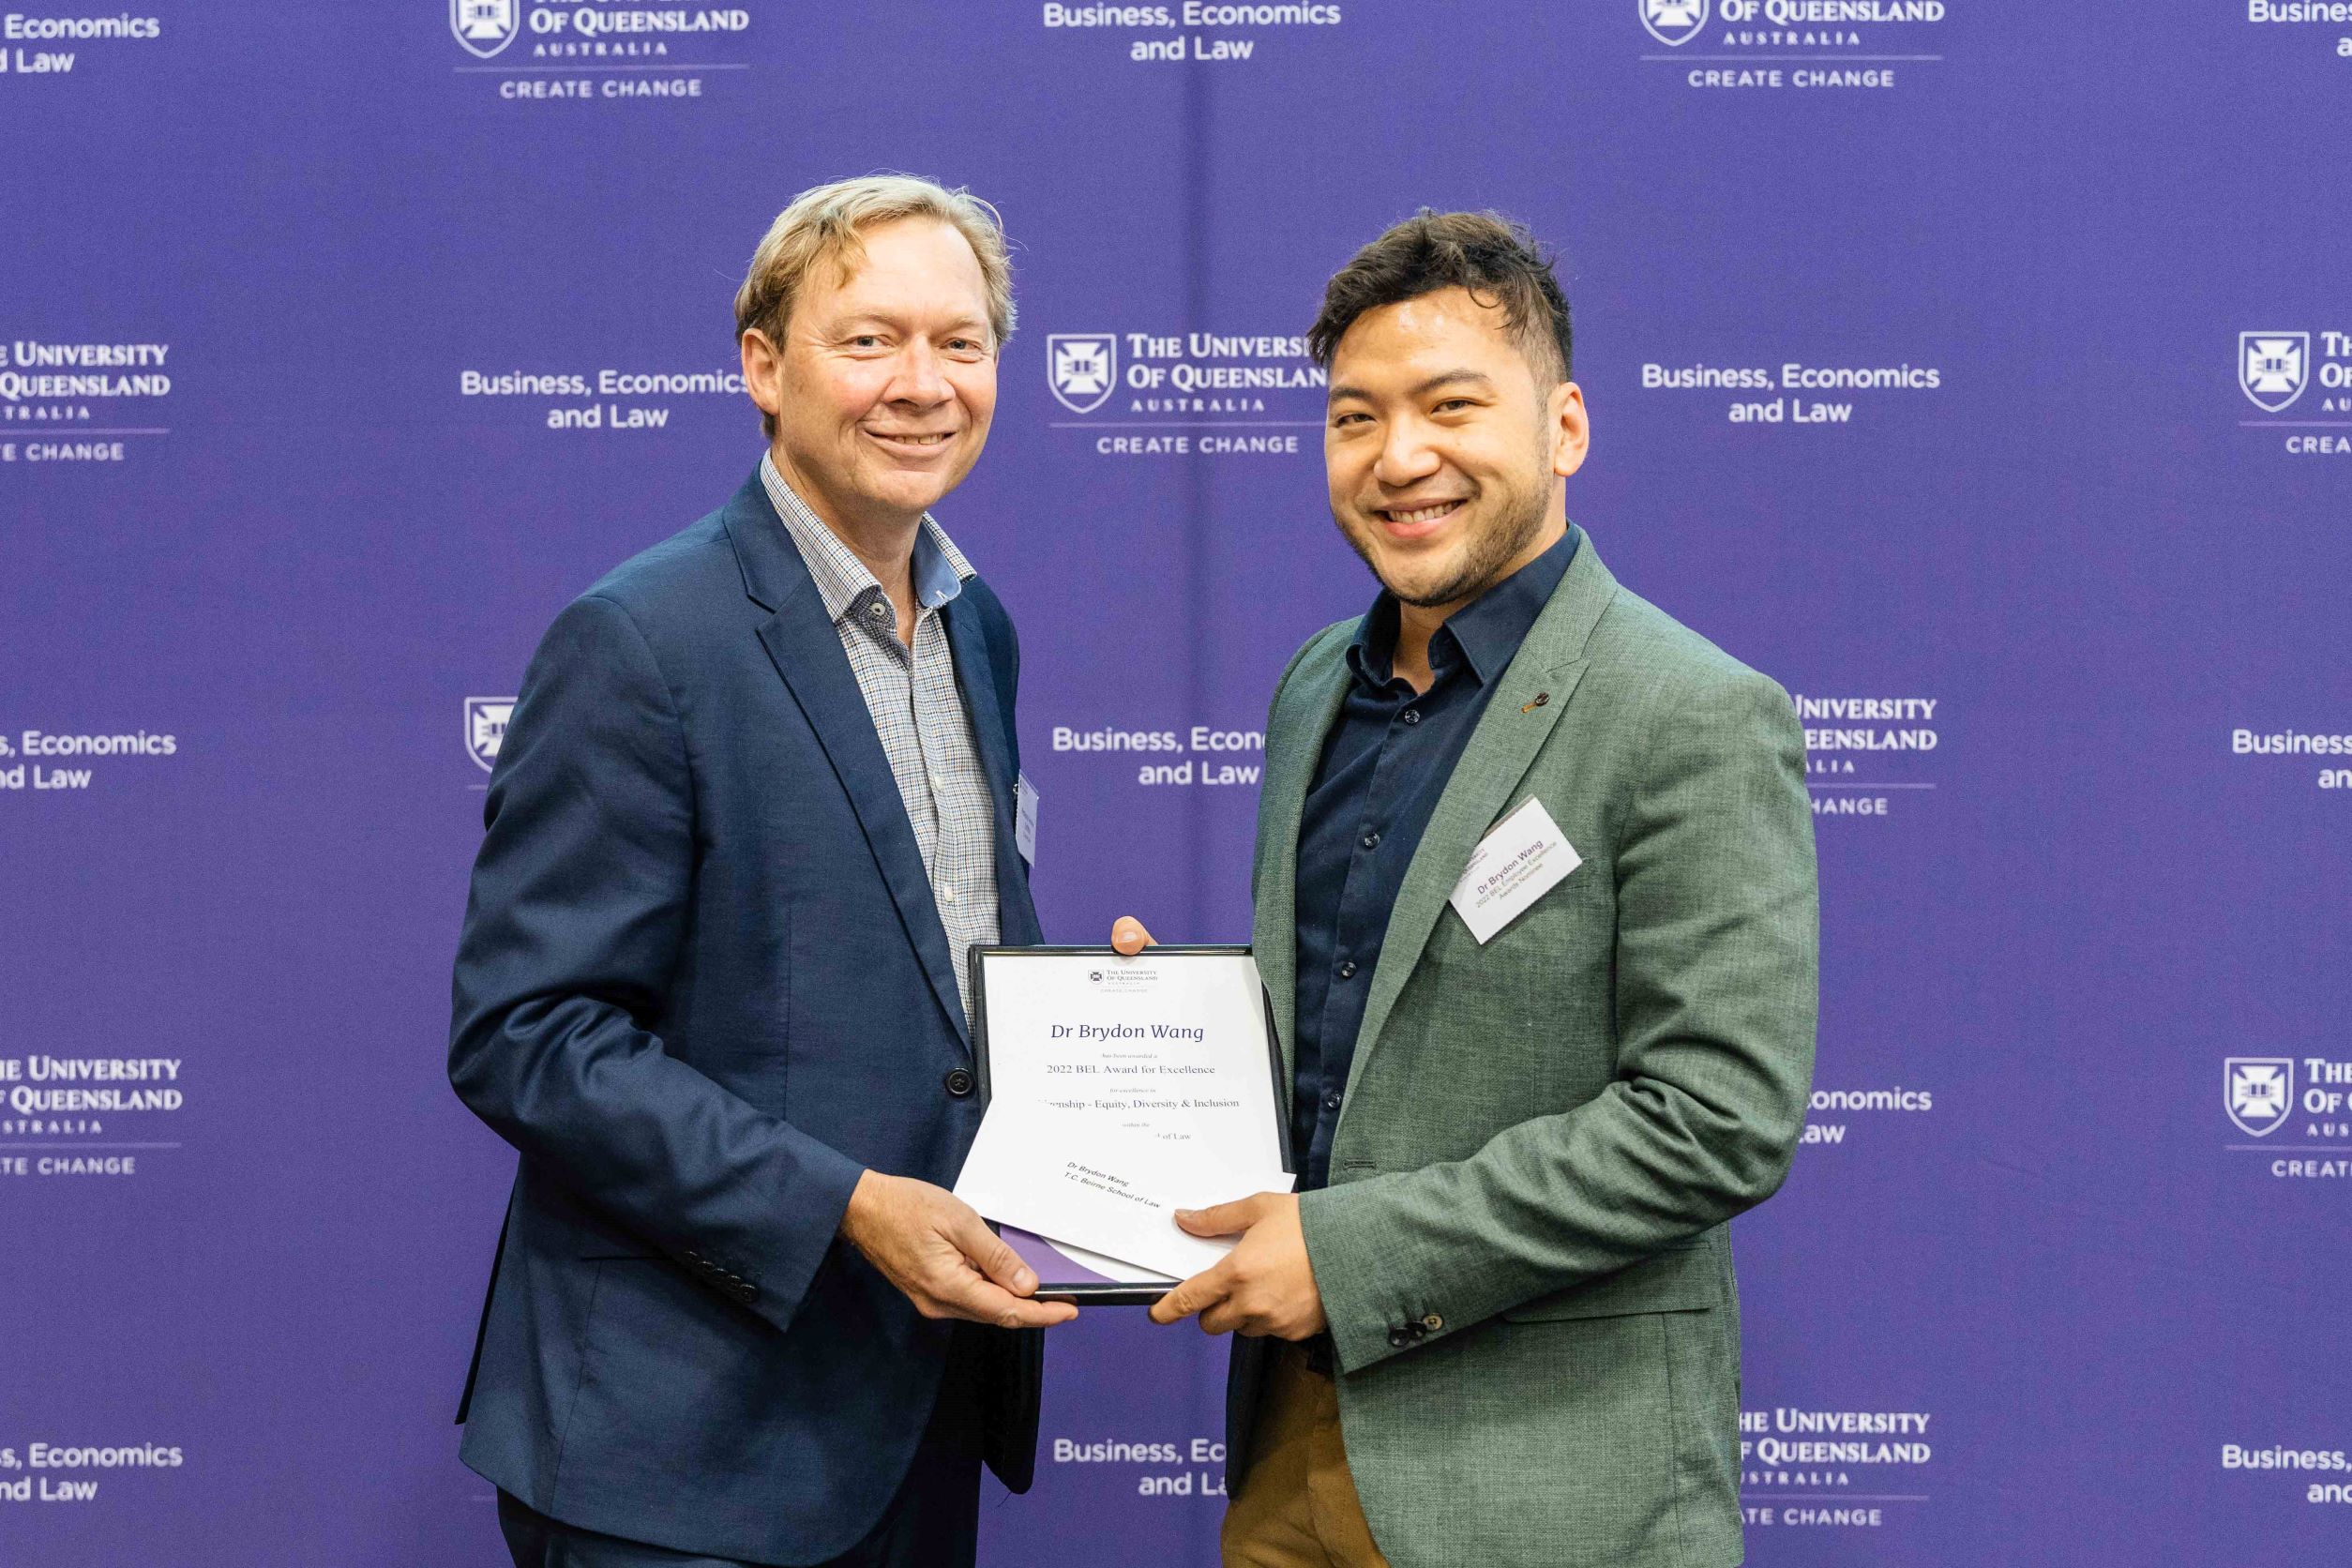 Professor Andrew Griffiths and Dr Brydon Wang